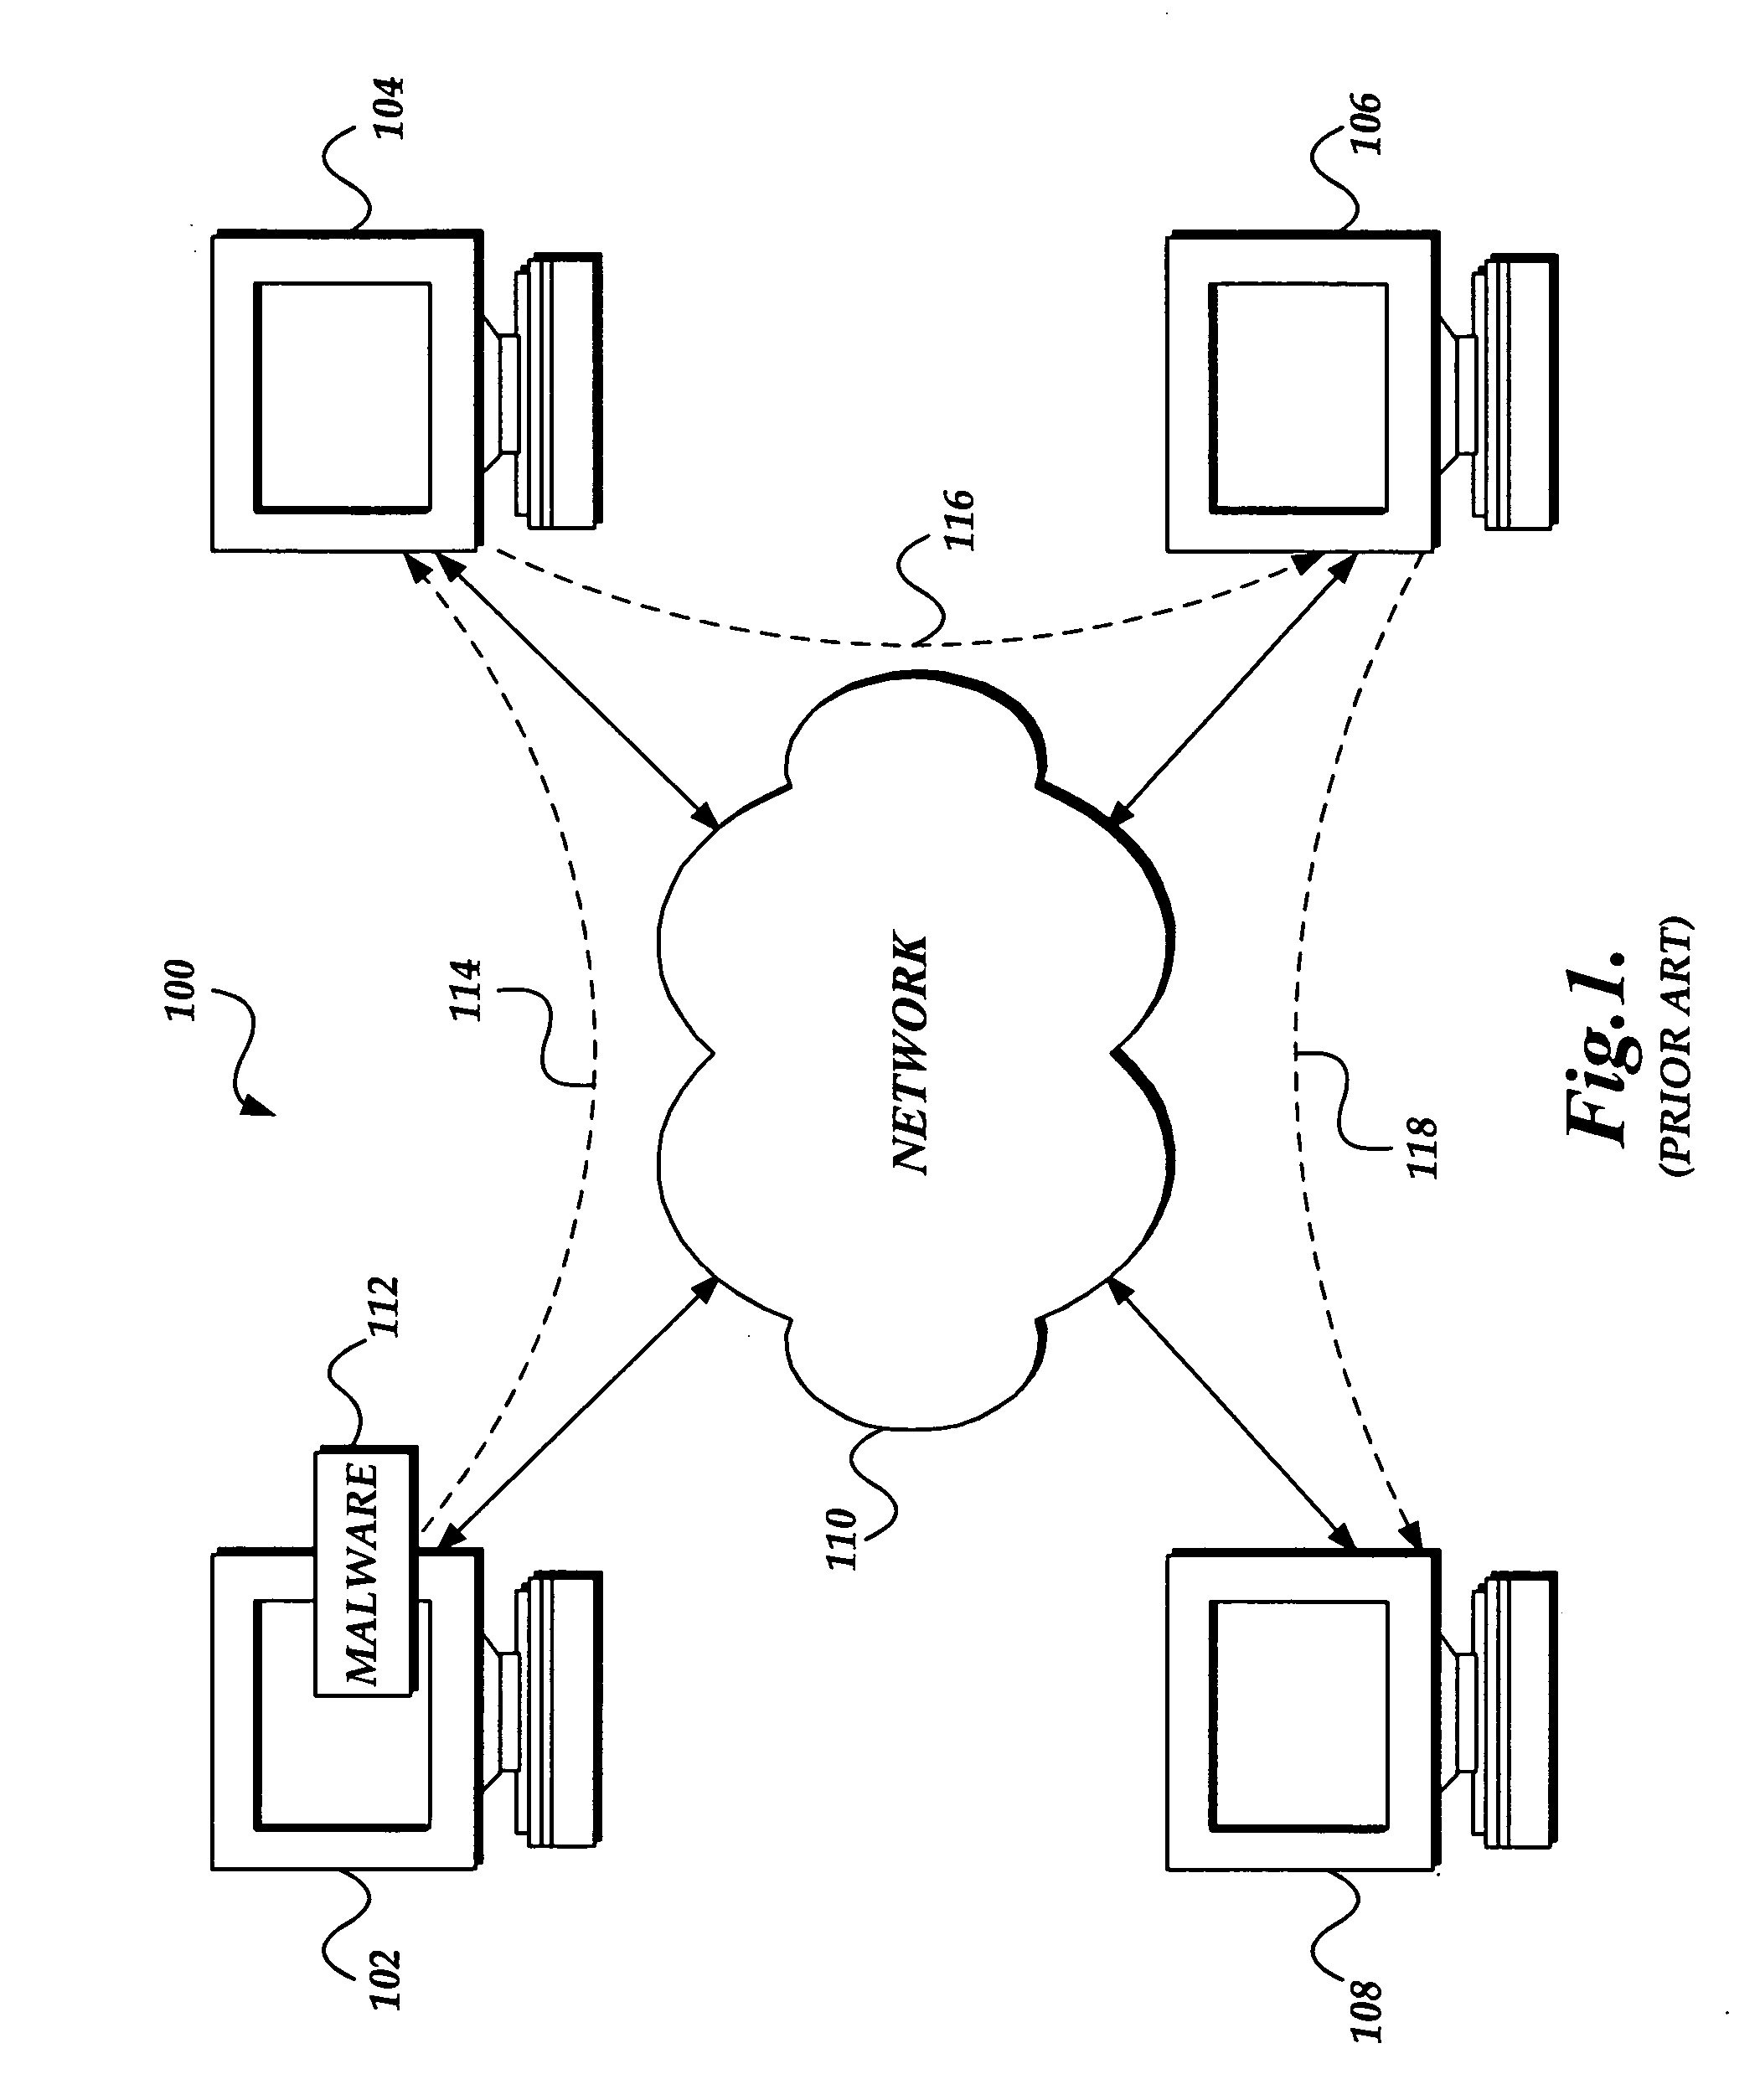 System and method of efficiently identifying and removing active malware from a computer